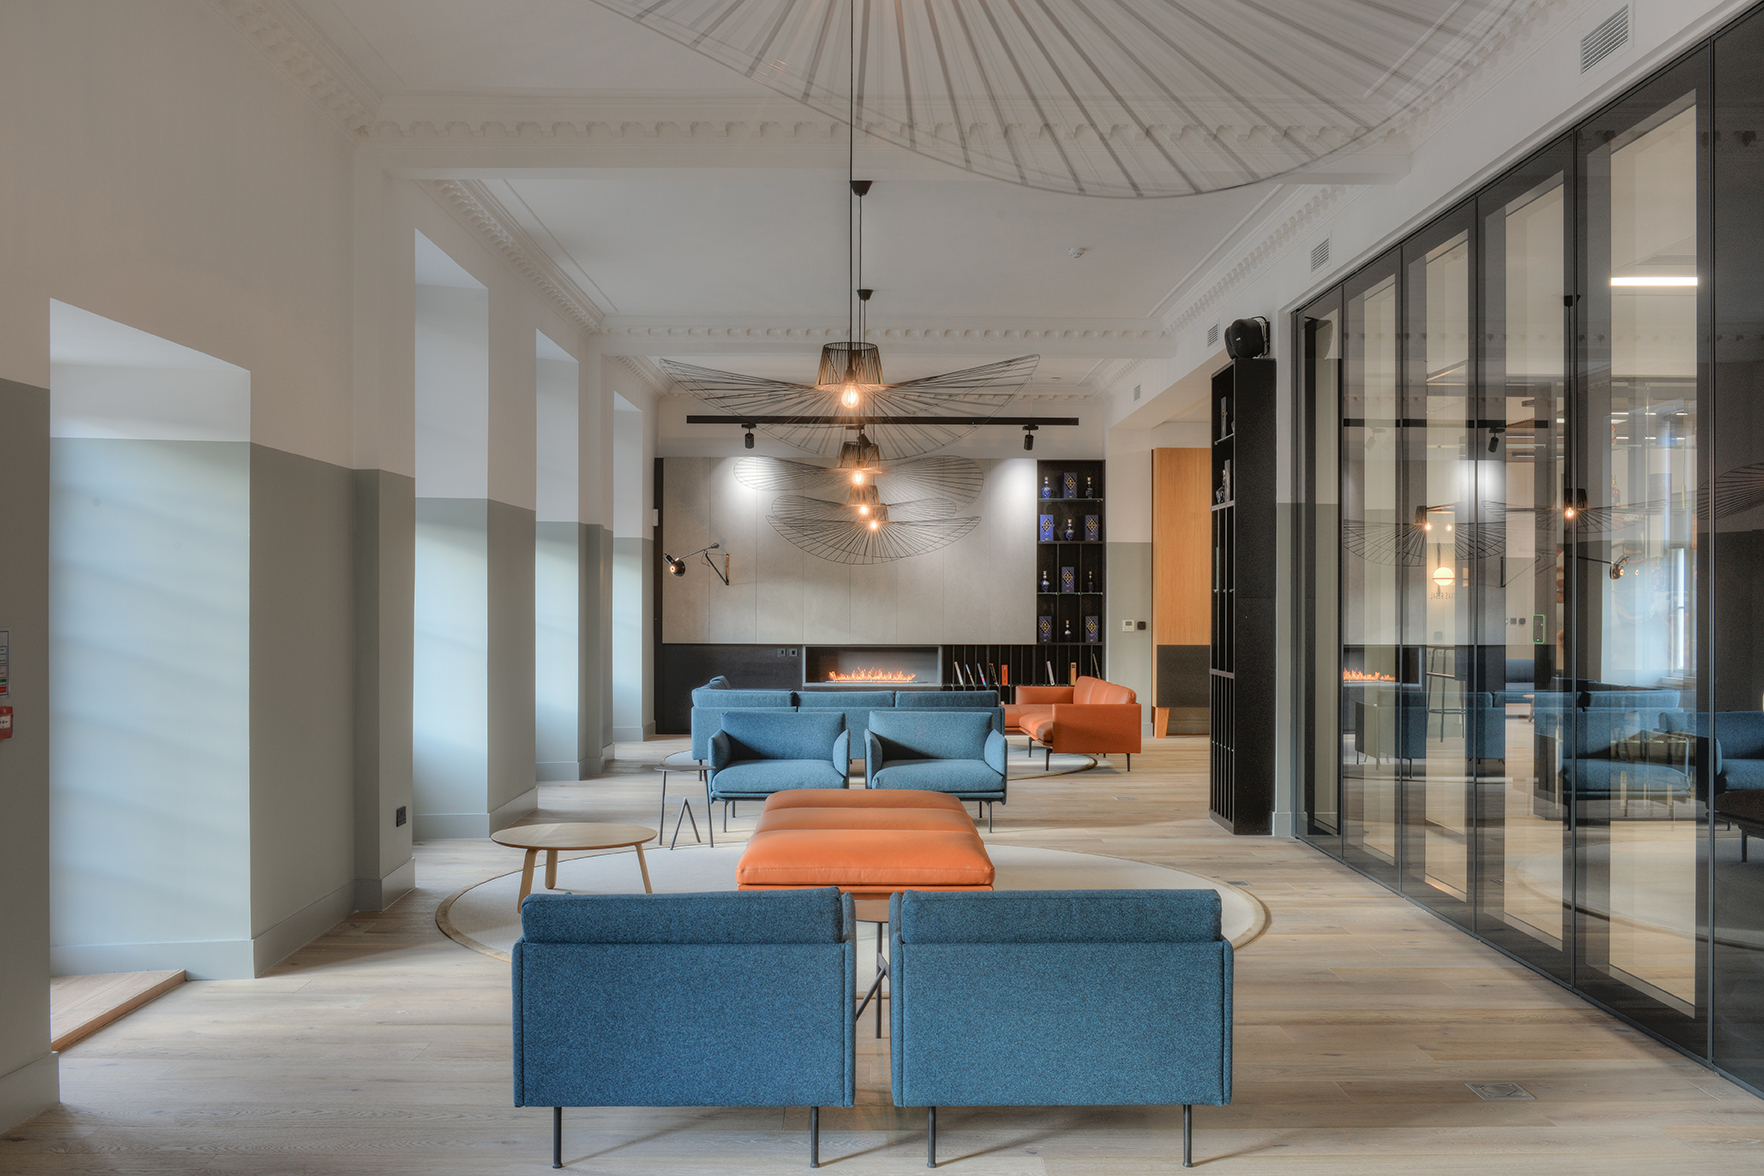 Graven imbues a spirit of conviviality in new Chivas Brothers HQ in Glasgow